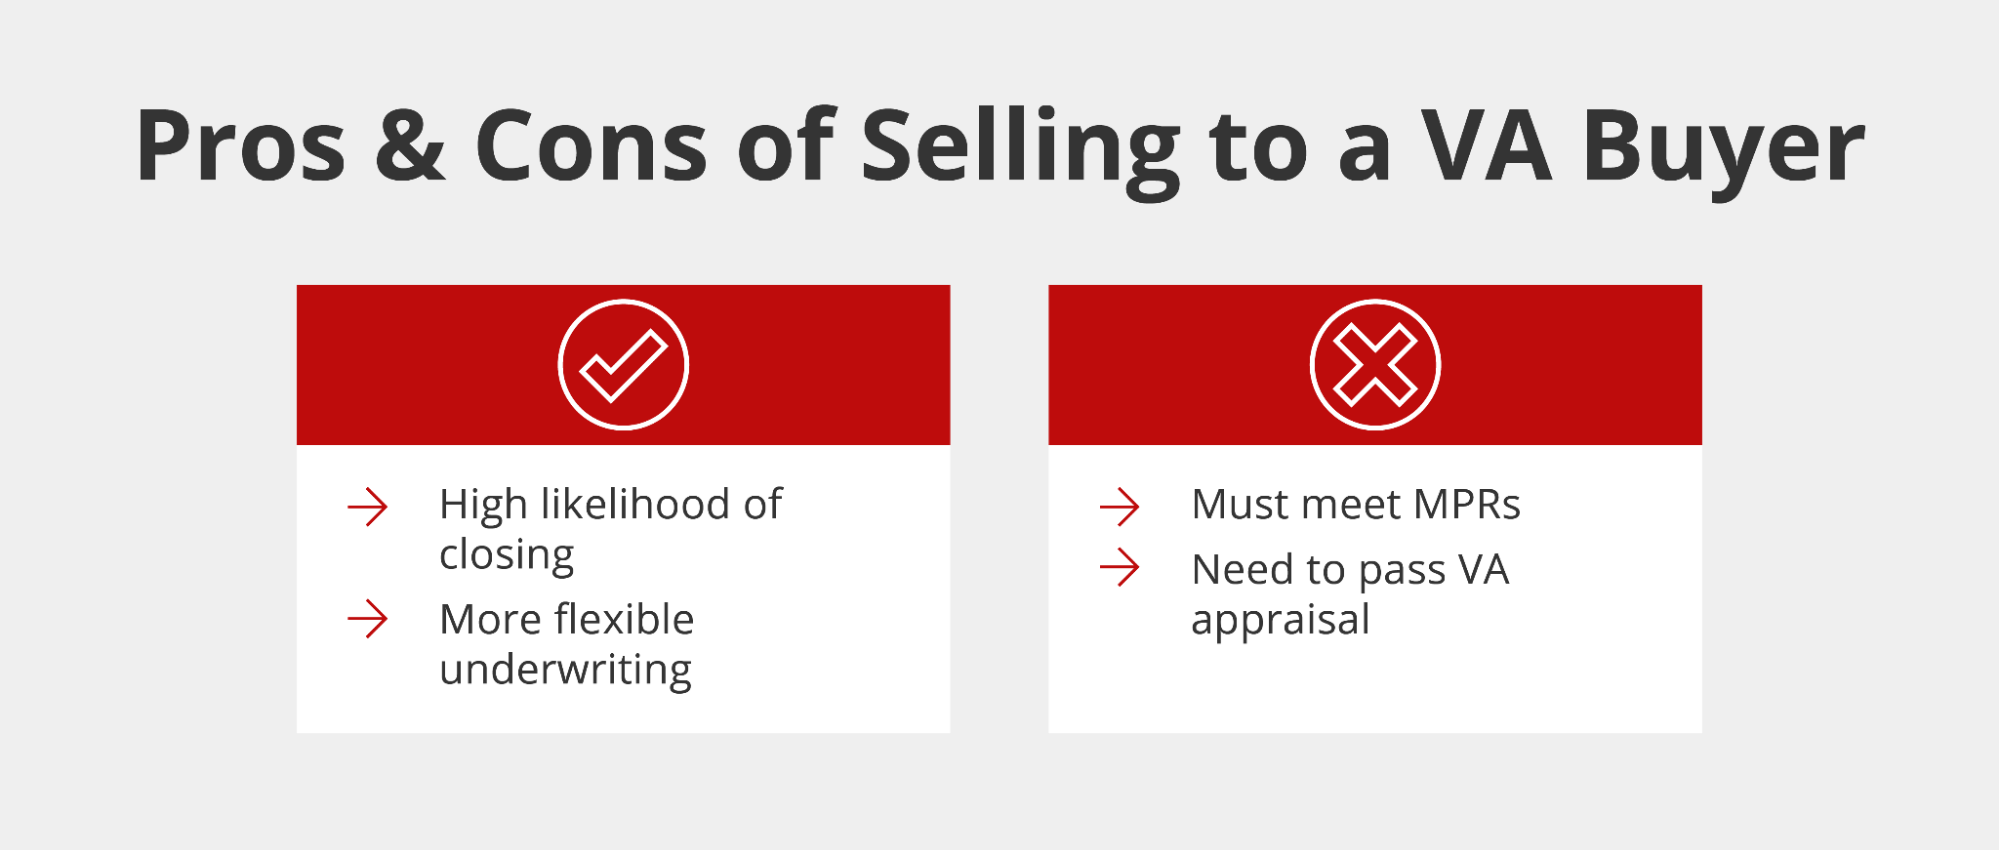 Graphic titled “Pros & Cons of Selling to a VA Buyer” with two tables. One box has a check mark at the top with text that reads “High likelihood of closing’ More flexible underwriting”. The second box has an “X” at the top and text that reads, “Must meet MPRs; Need to pass VA appraisal”.